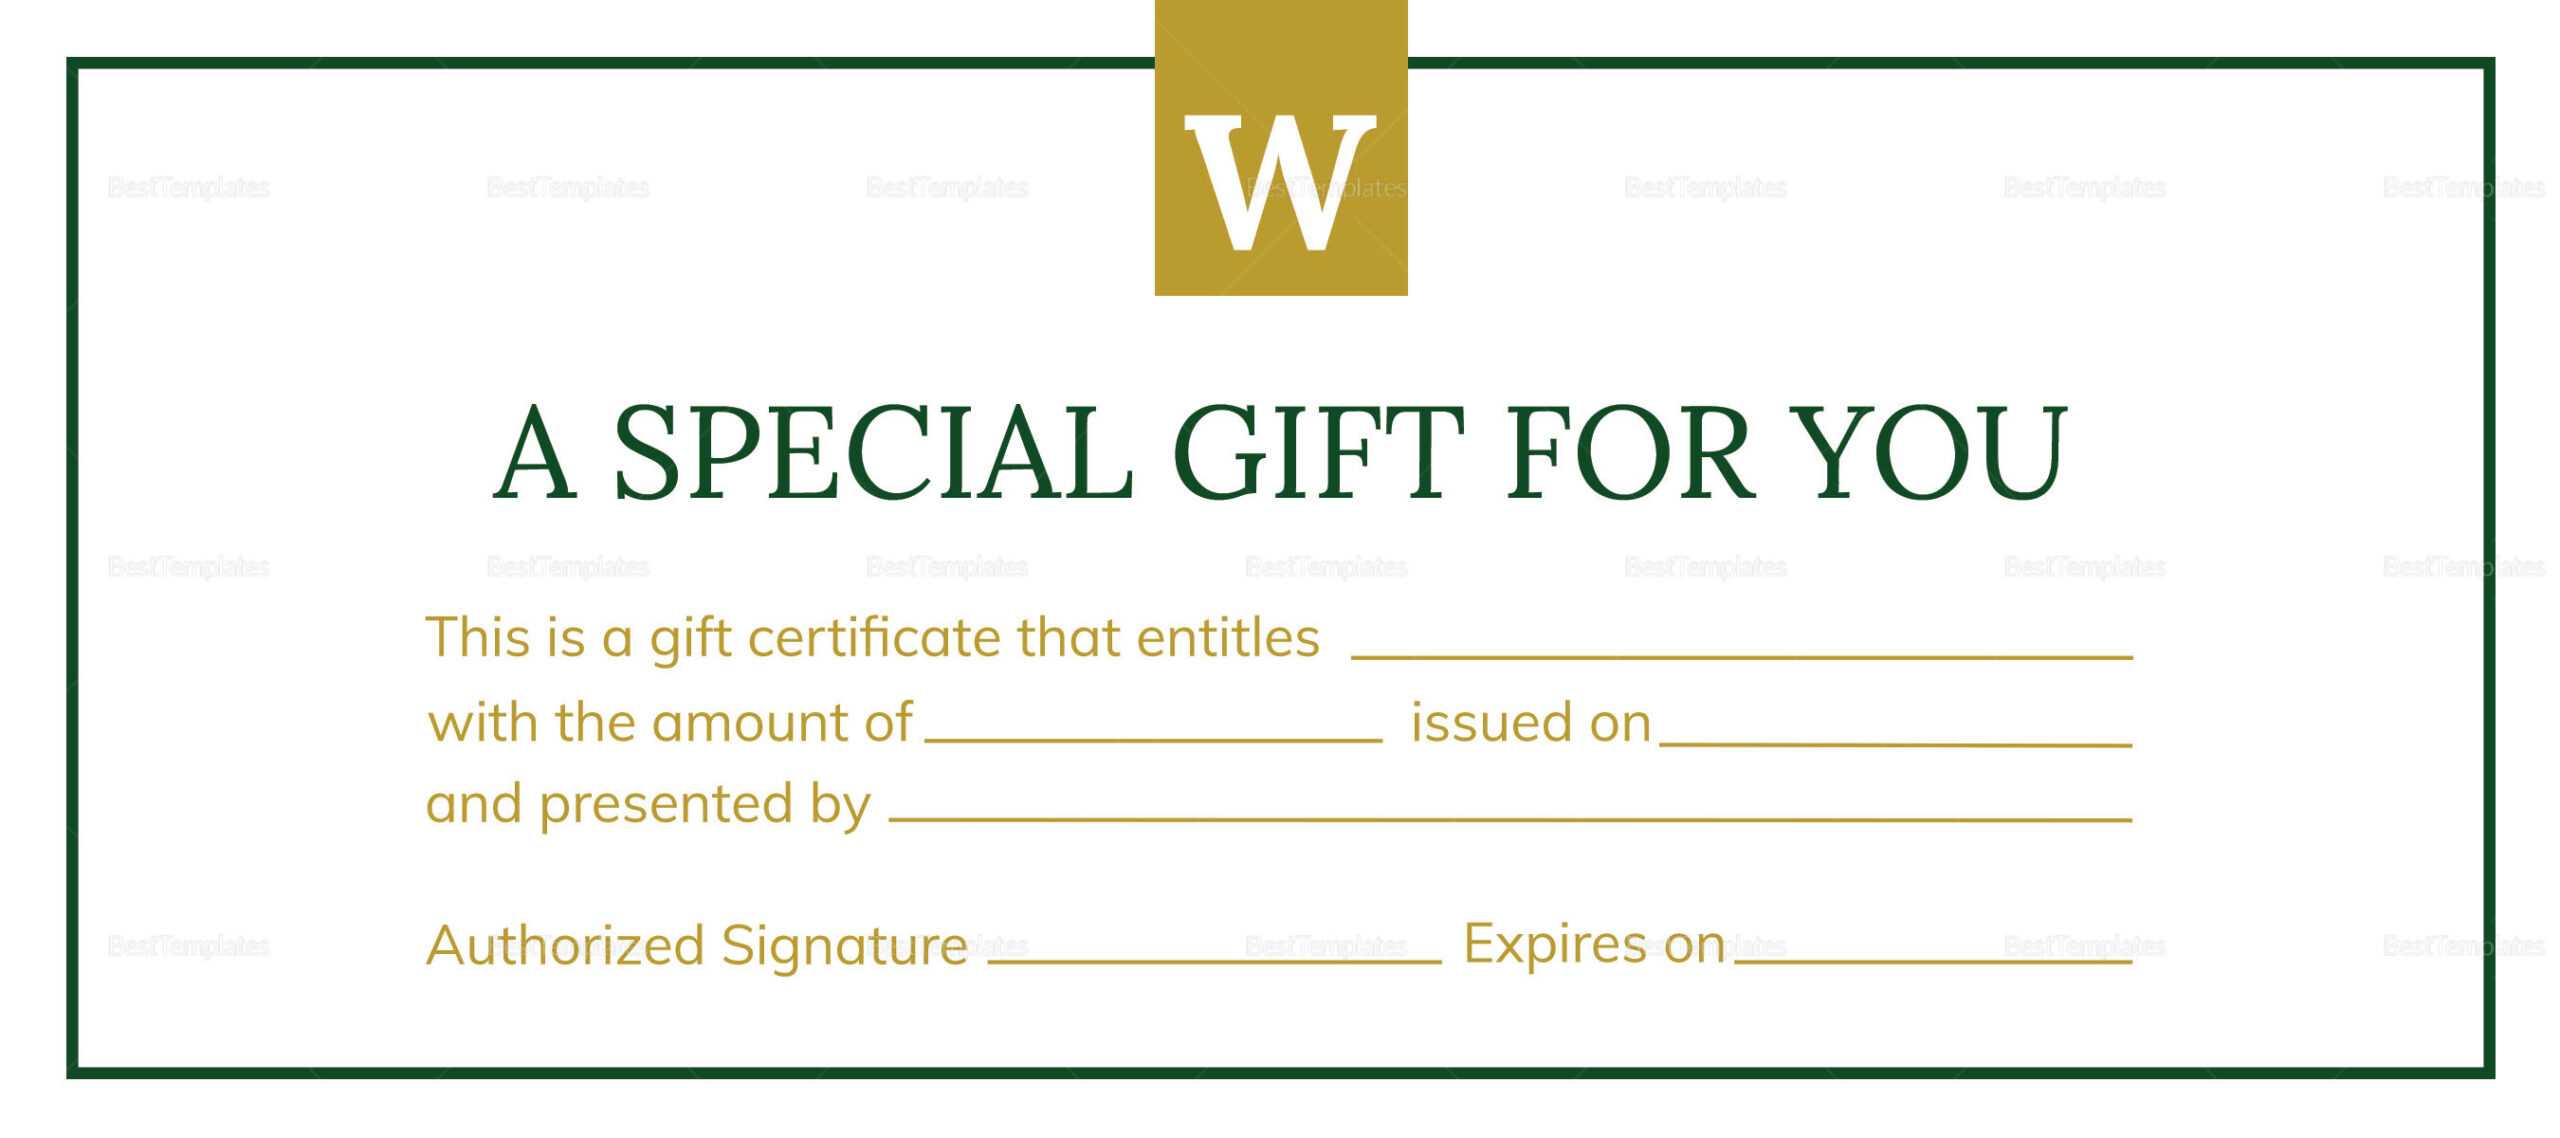 Hotel Gift Certificate Template Within Gift Certificate Template Indesign